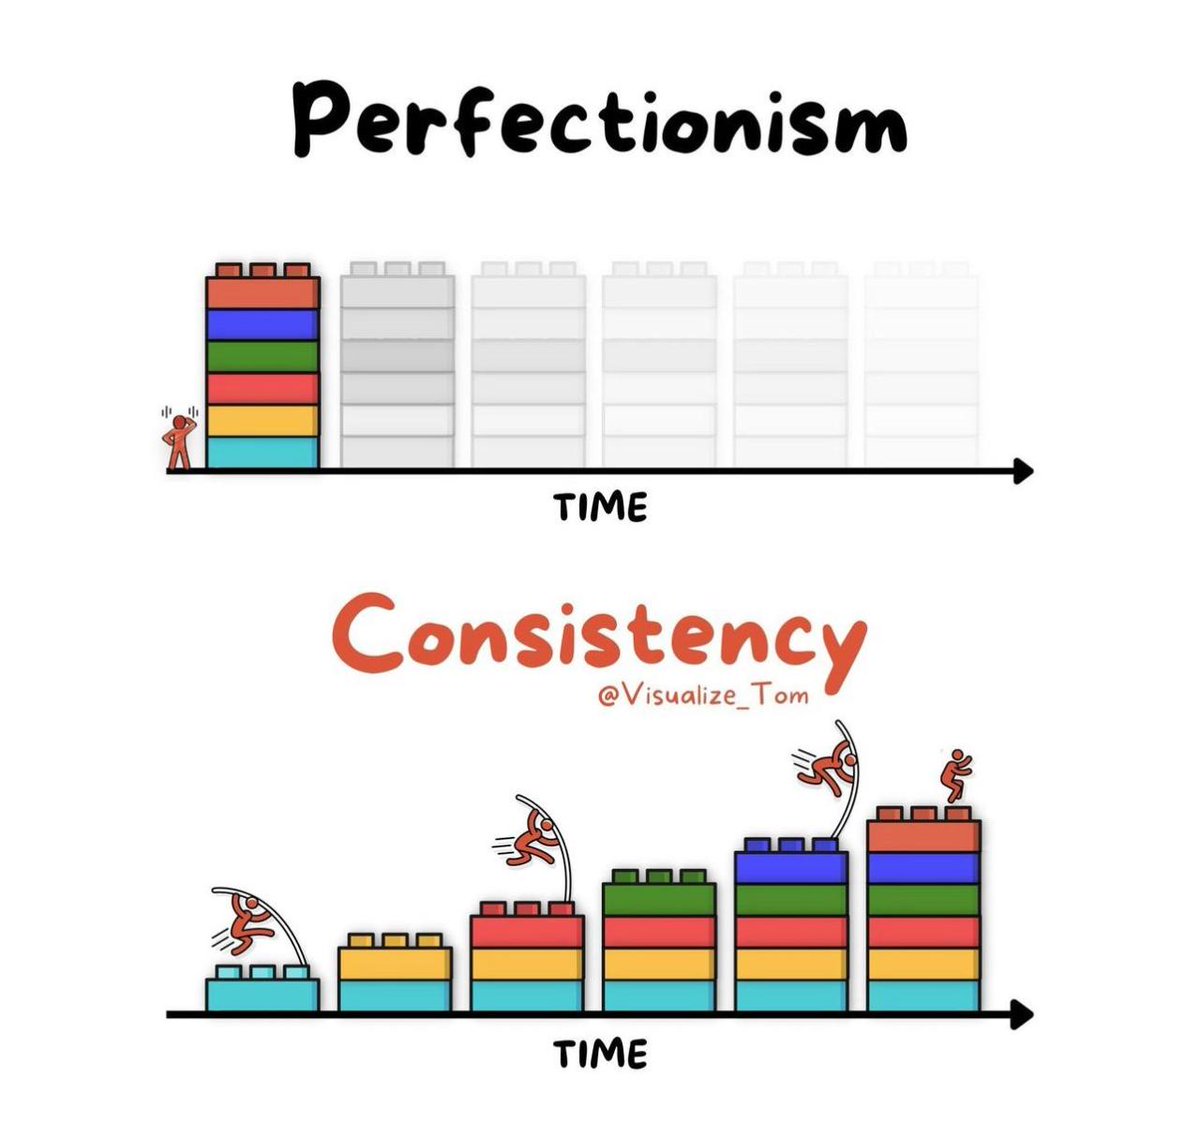 “Embrace the journey of growth with consistency; where perfectionism pauses, persistence propels. 

#ProgressOverPerfection #ConsistentGrowth #VisualizeSuccess